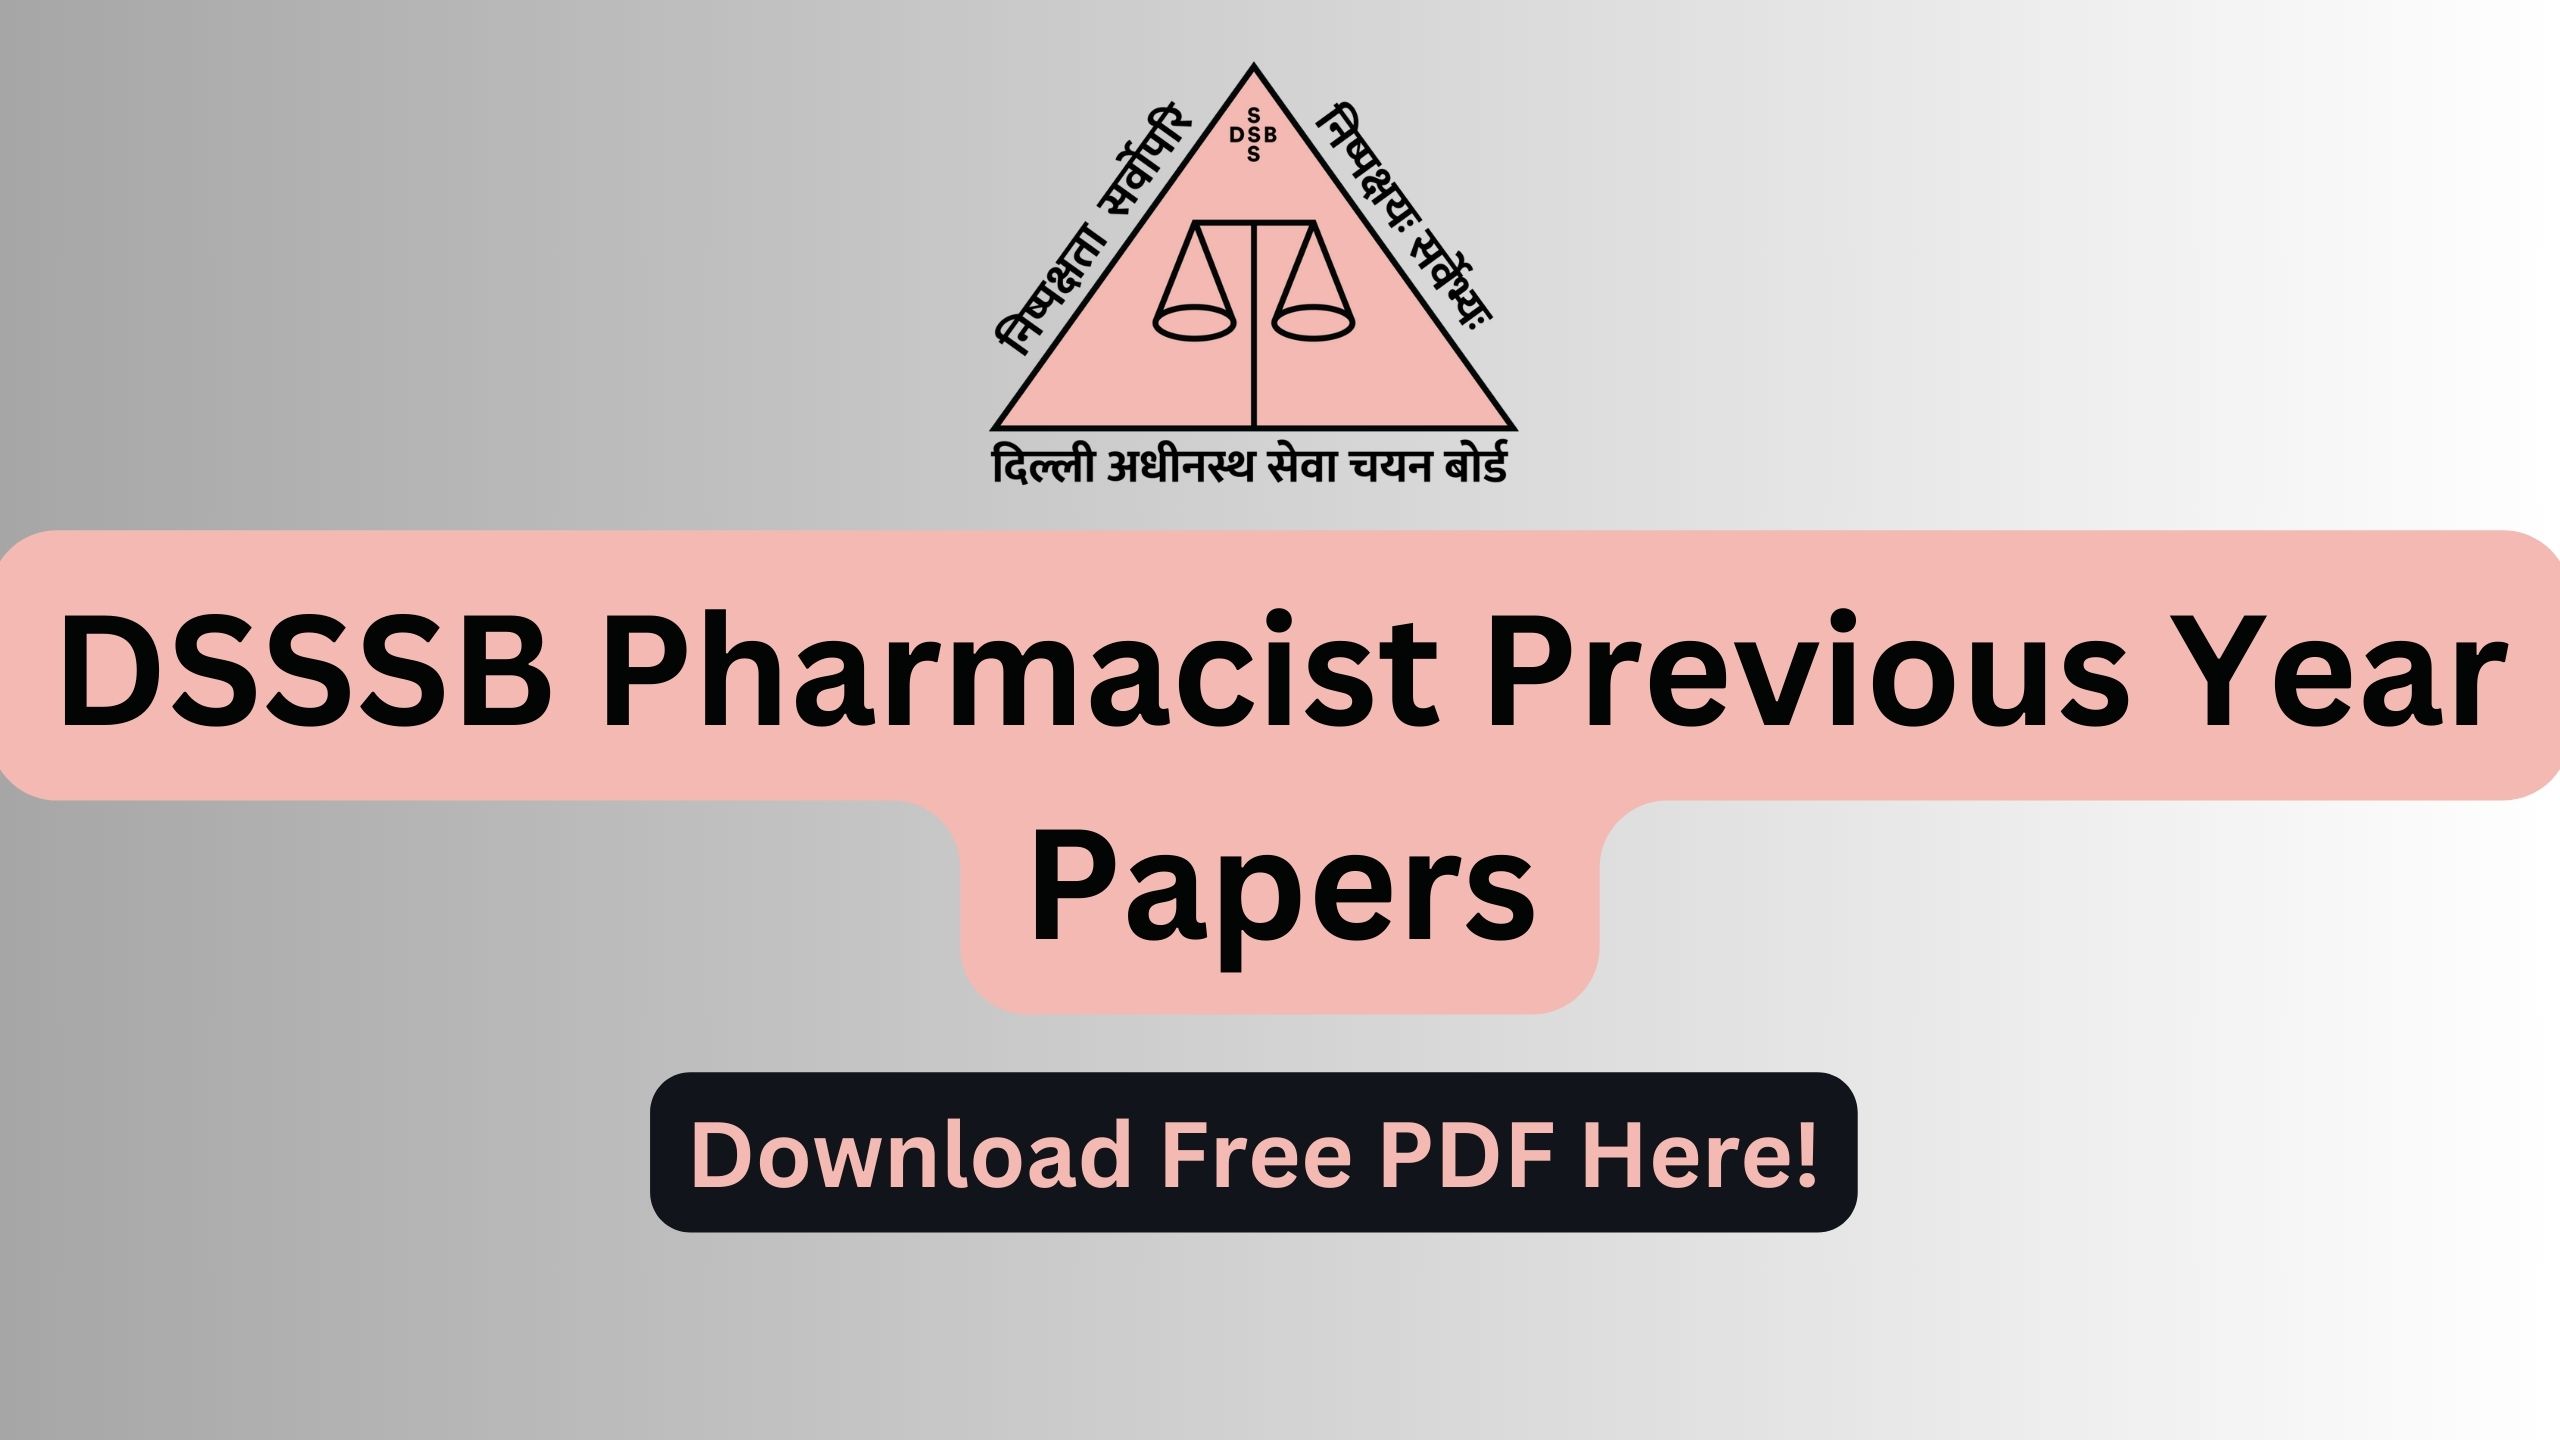 DSSSB Pharmacist Previous Year Papers